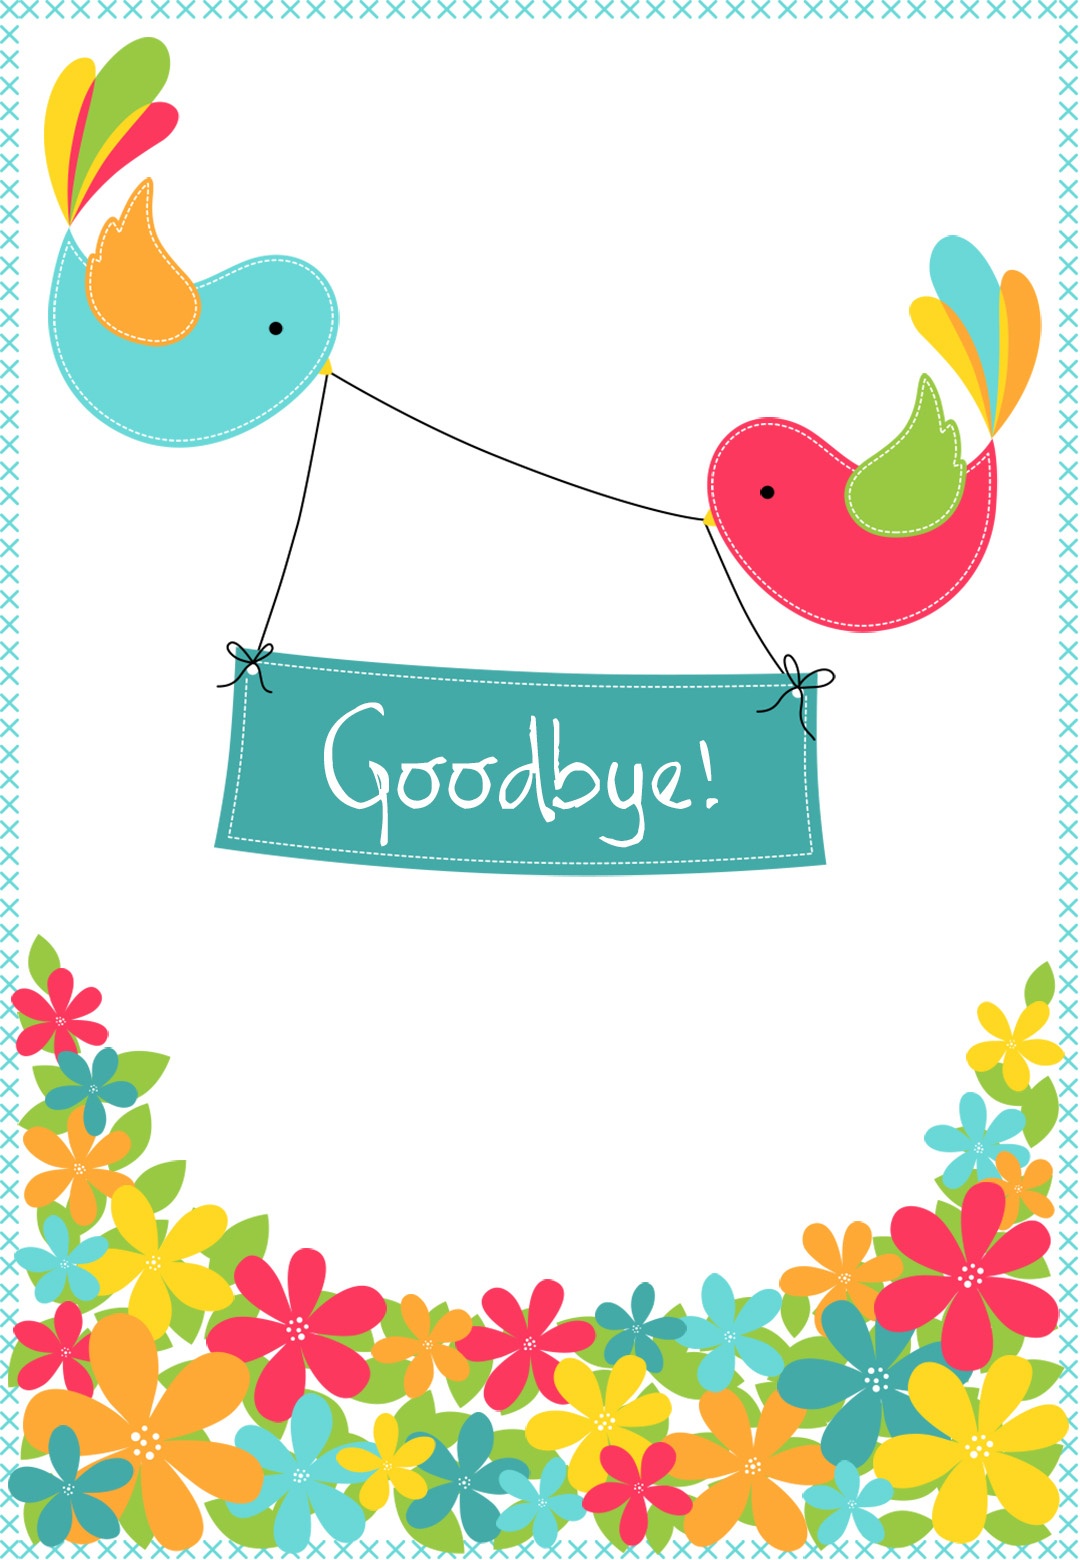 Goodbye From Your Colleagues - Good Luck Card (Free) | Greetings Island - Free Printable Goodbye Cards